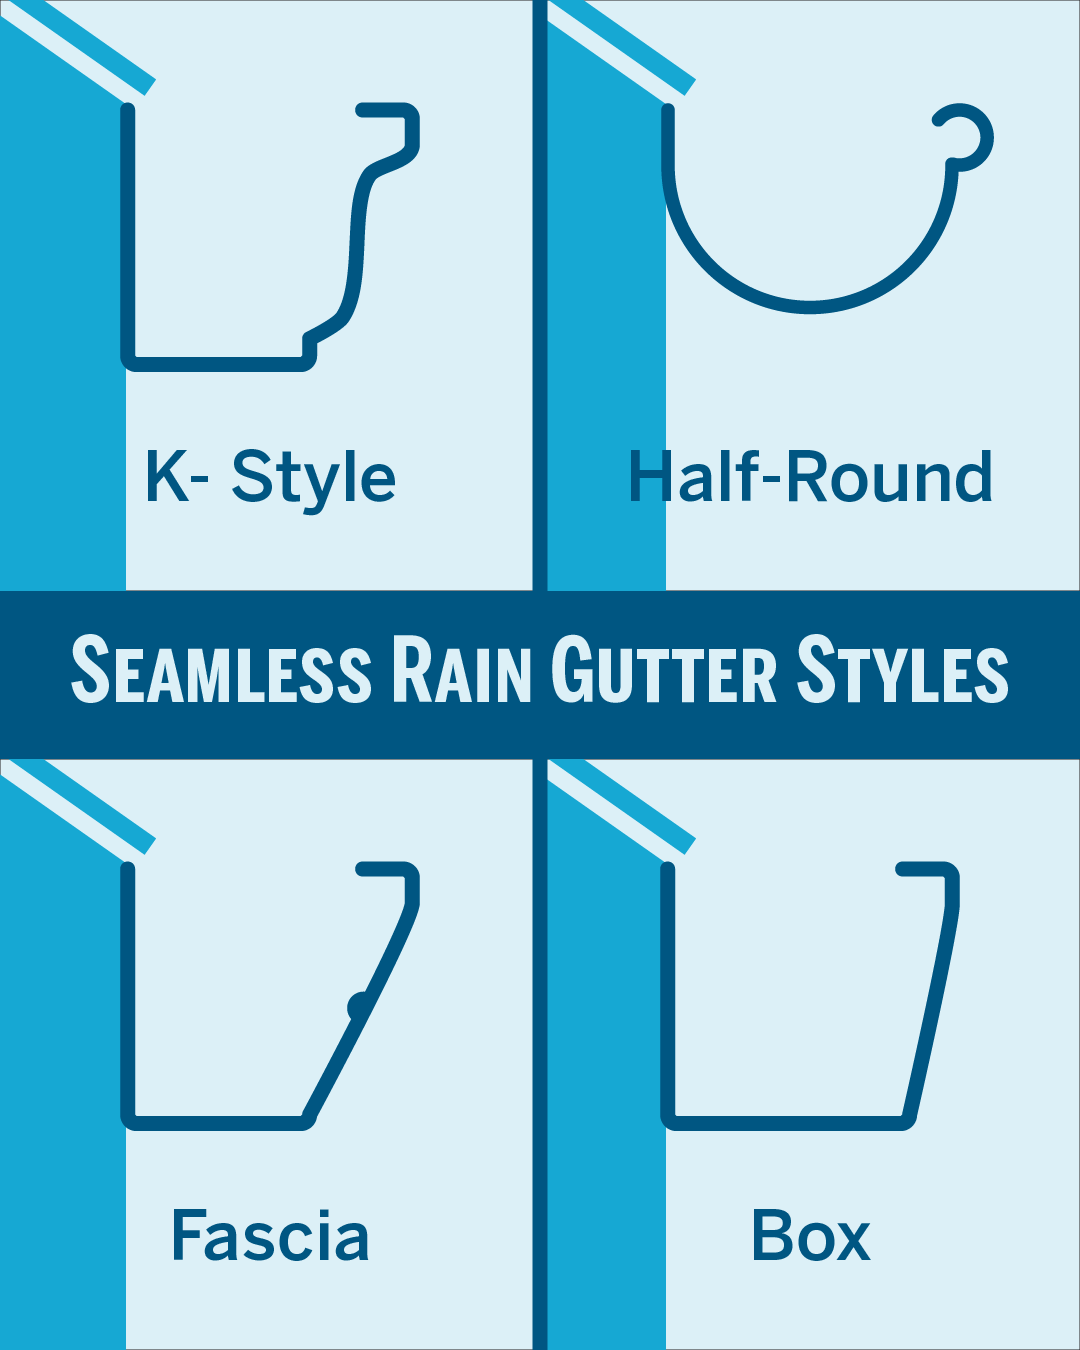 Graphic showing different seamless rain gutter styles like K-Style, Half-Round, Fascia, and Box.